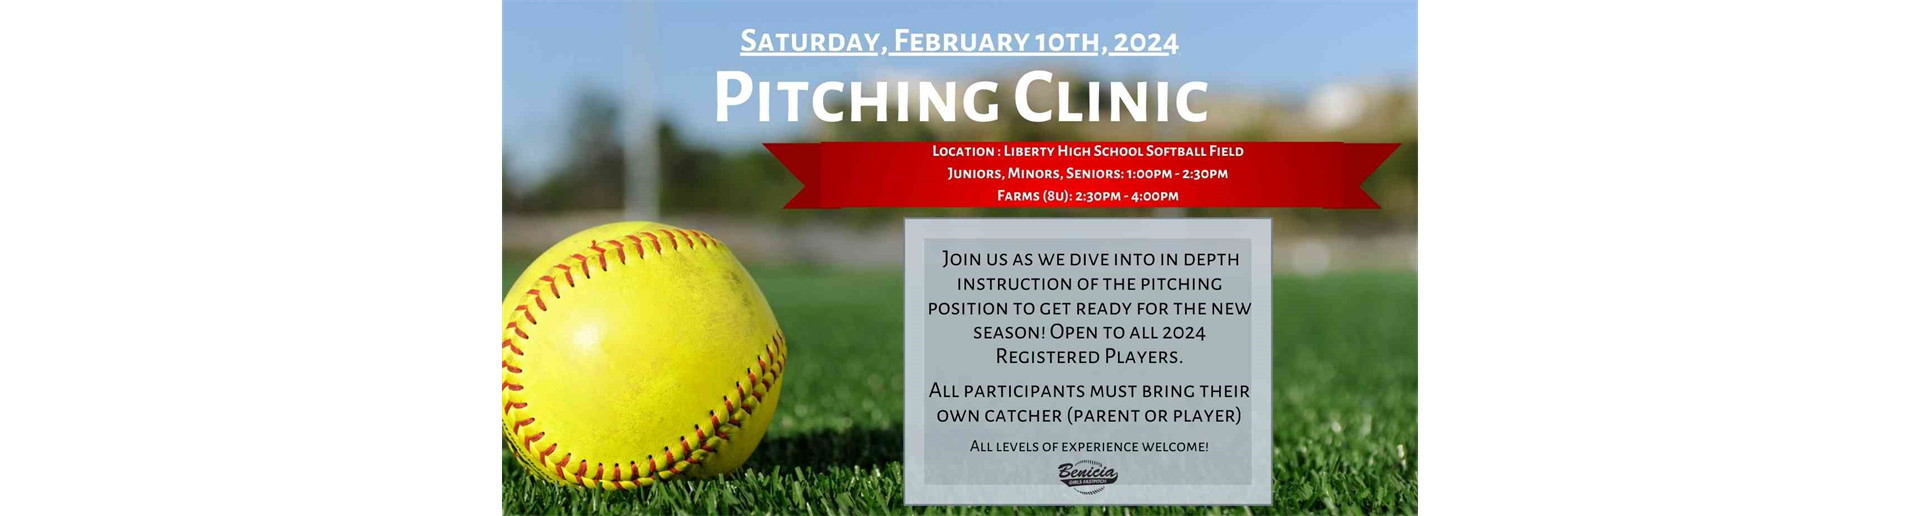 2024 Pitching Clinic